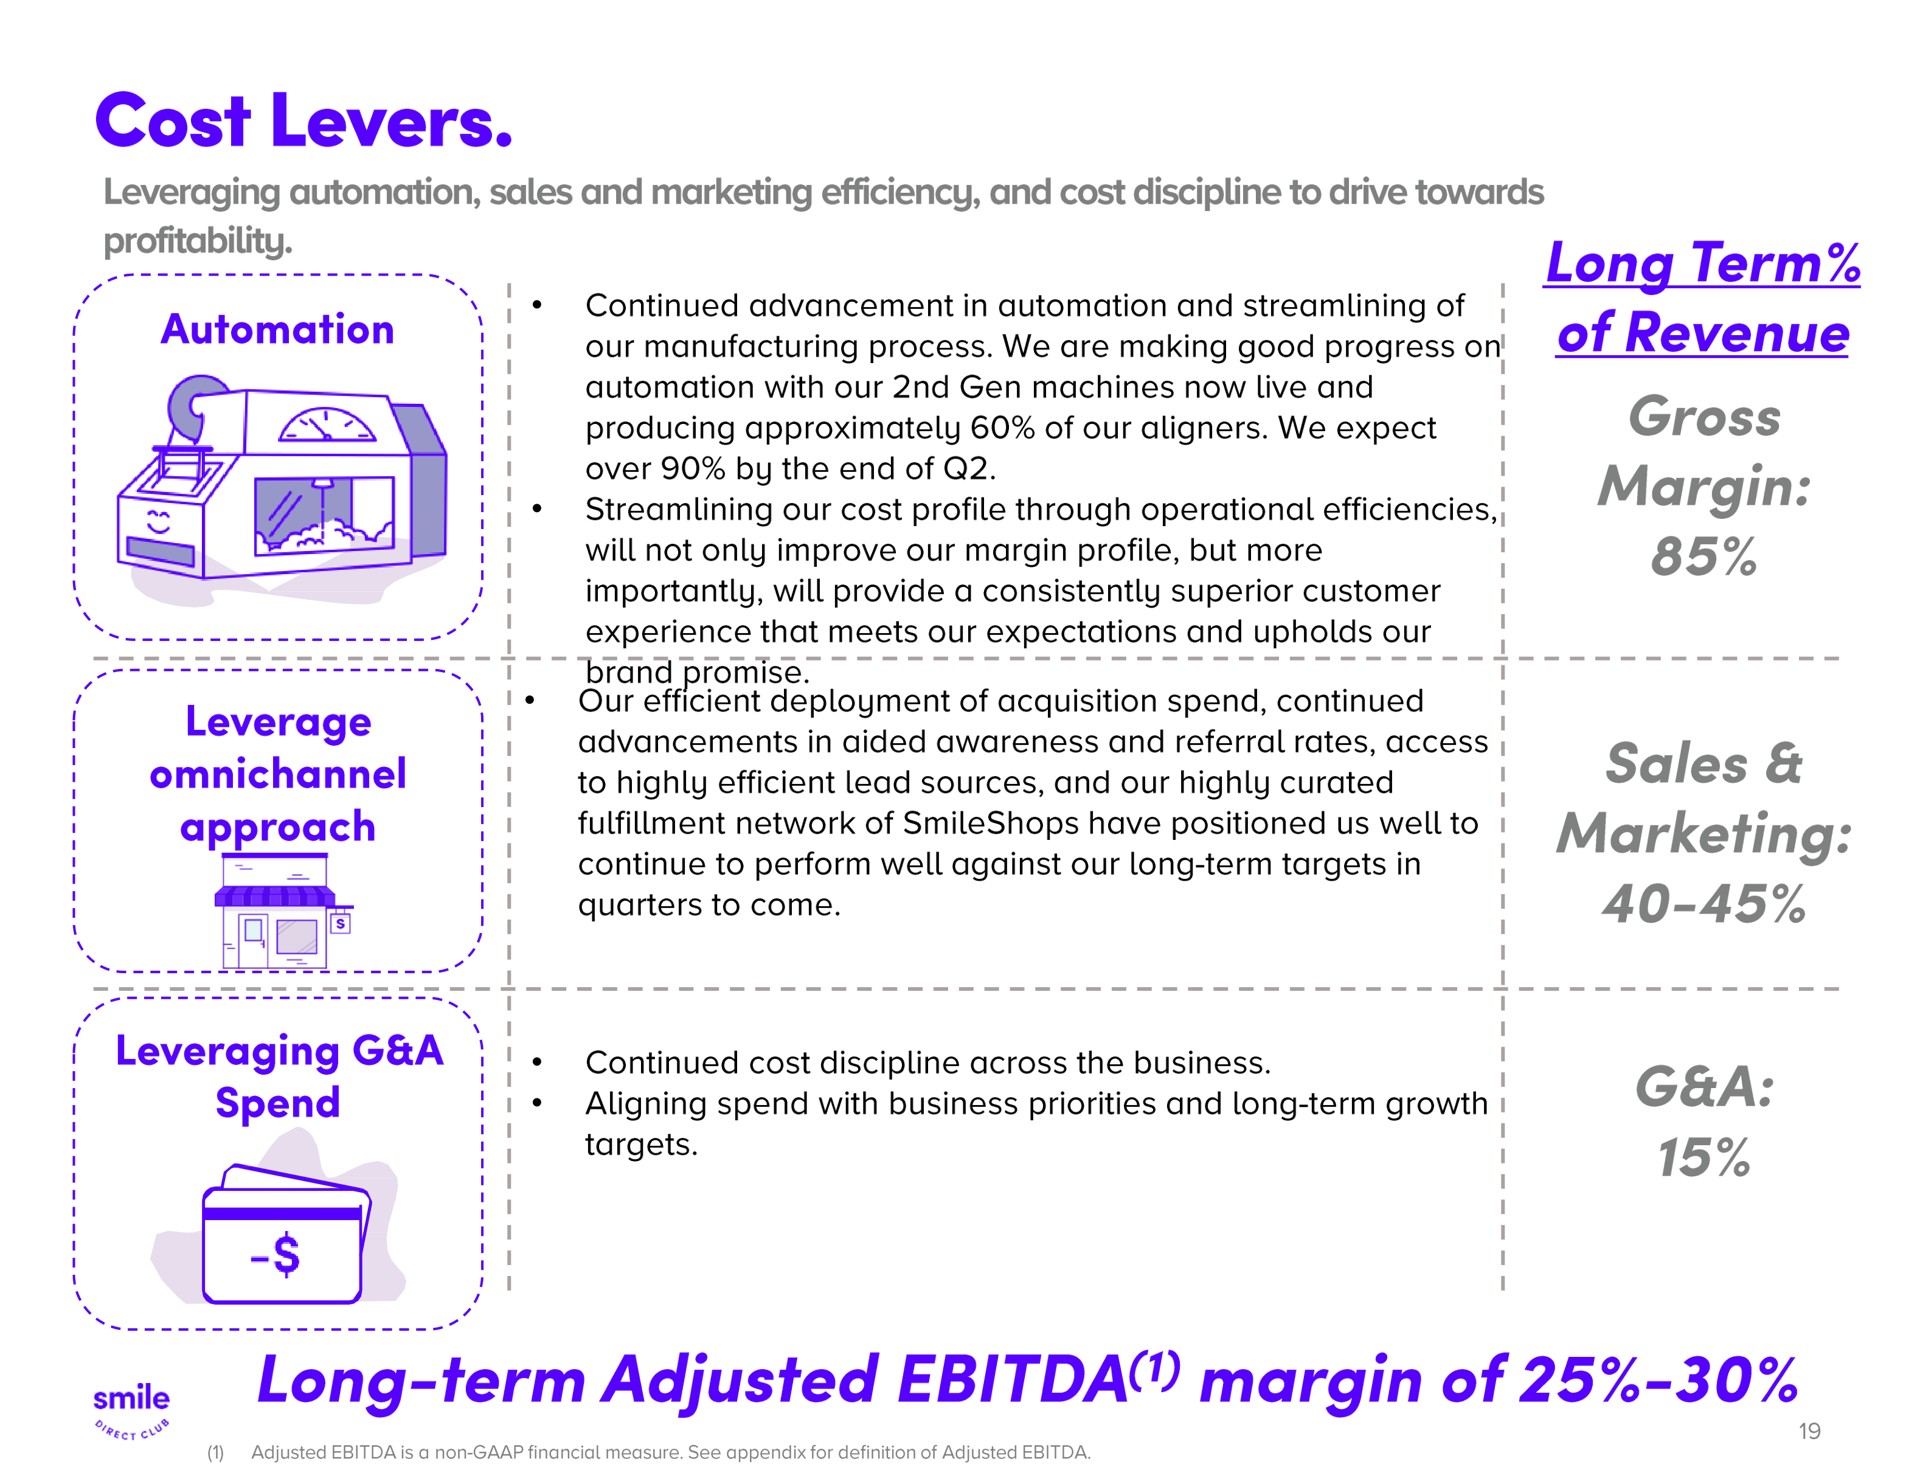 cost levers long term of revenue gross margin sales marketing spend a long form adjusted margin of | SmileDirectClub